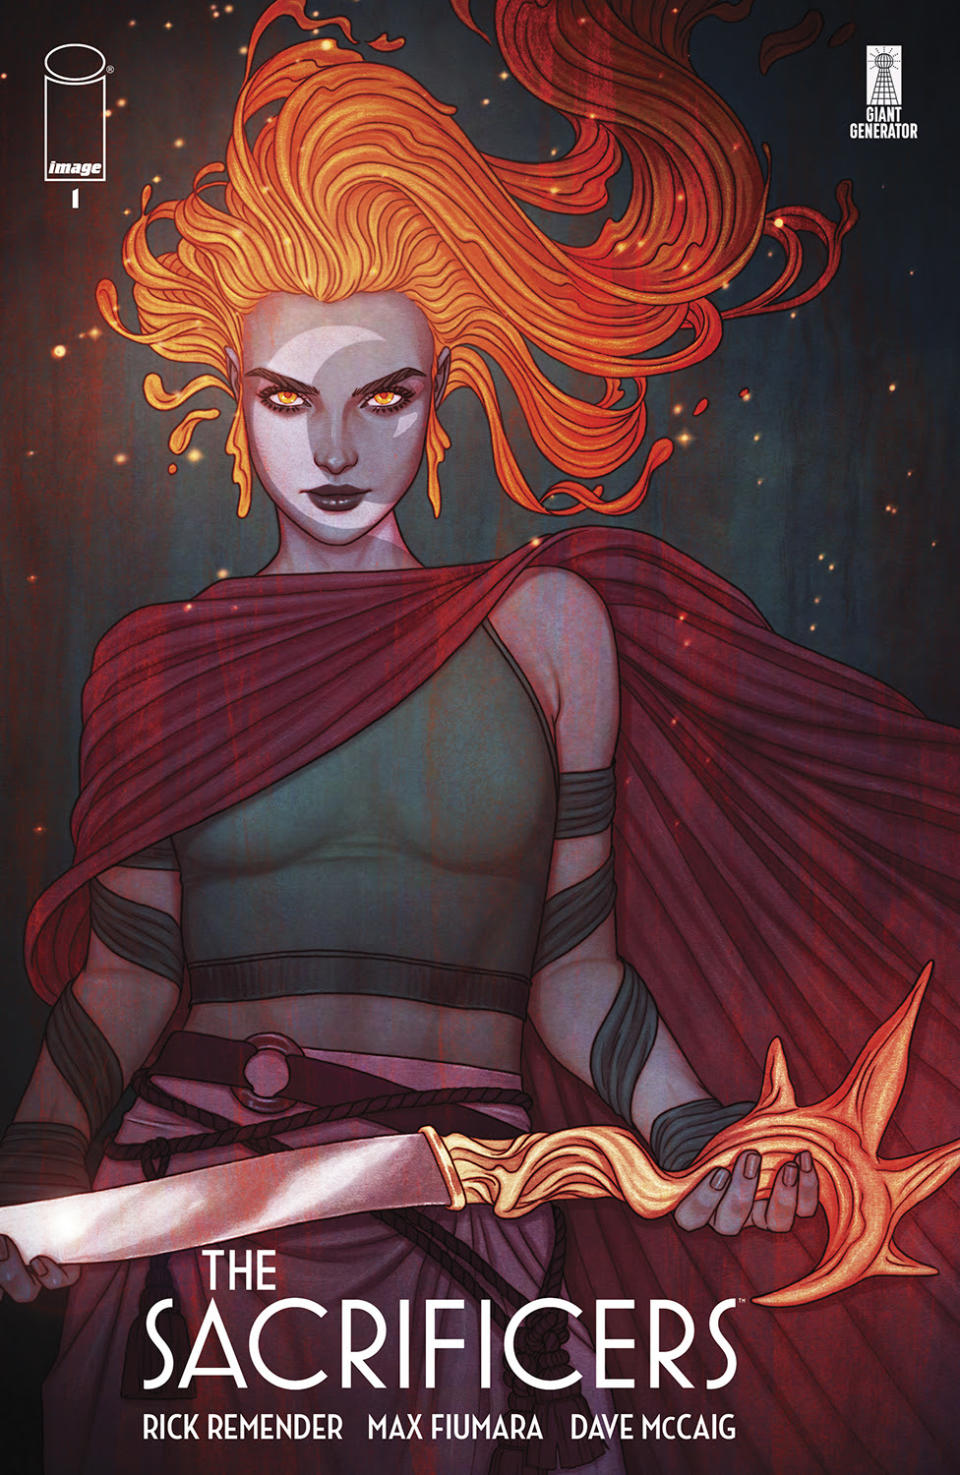 Jenny Frison's cover for The Sacrificers.